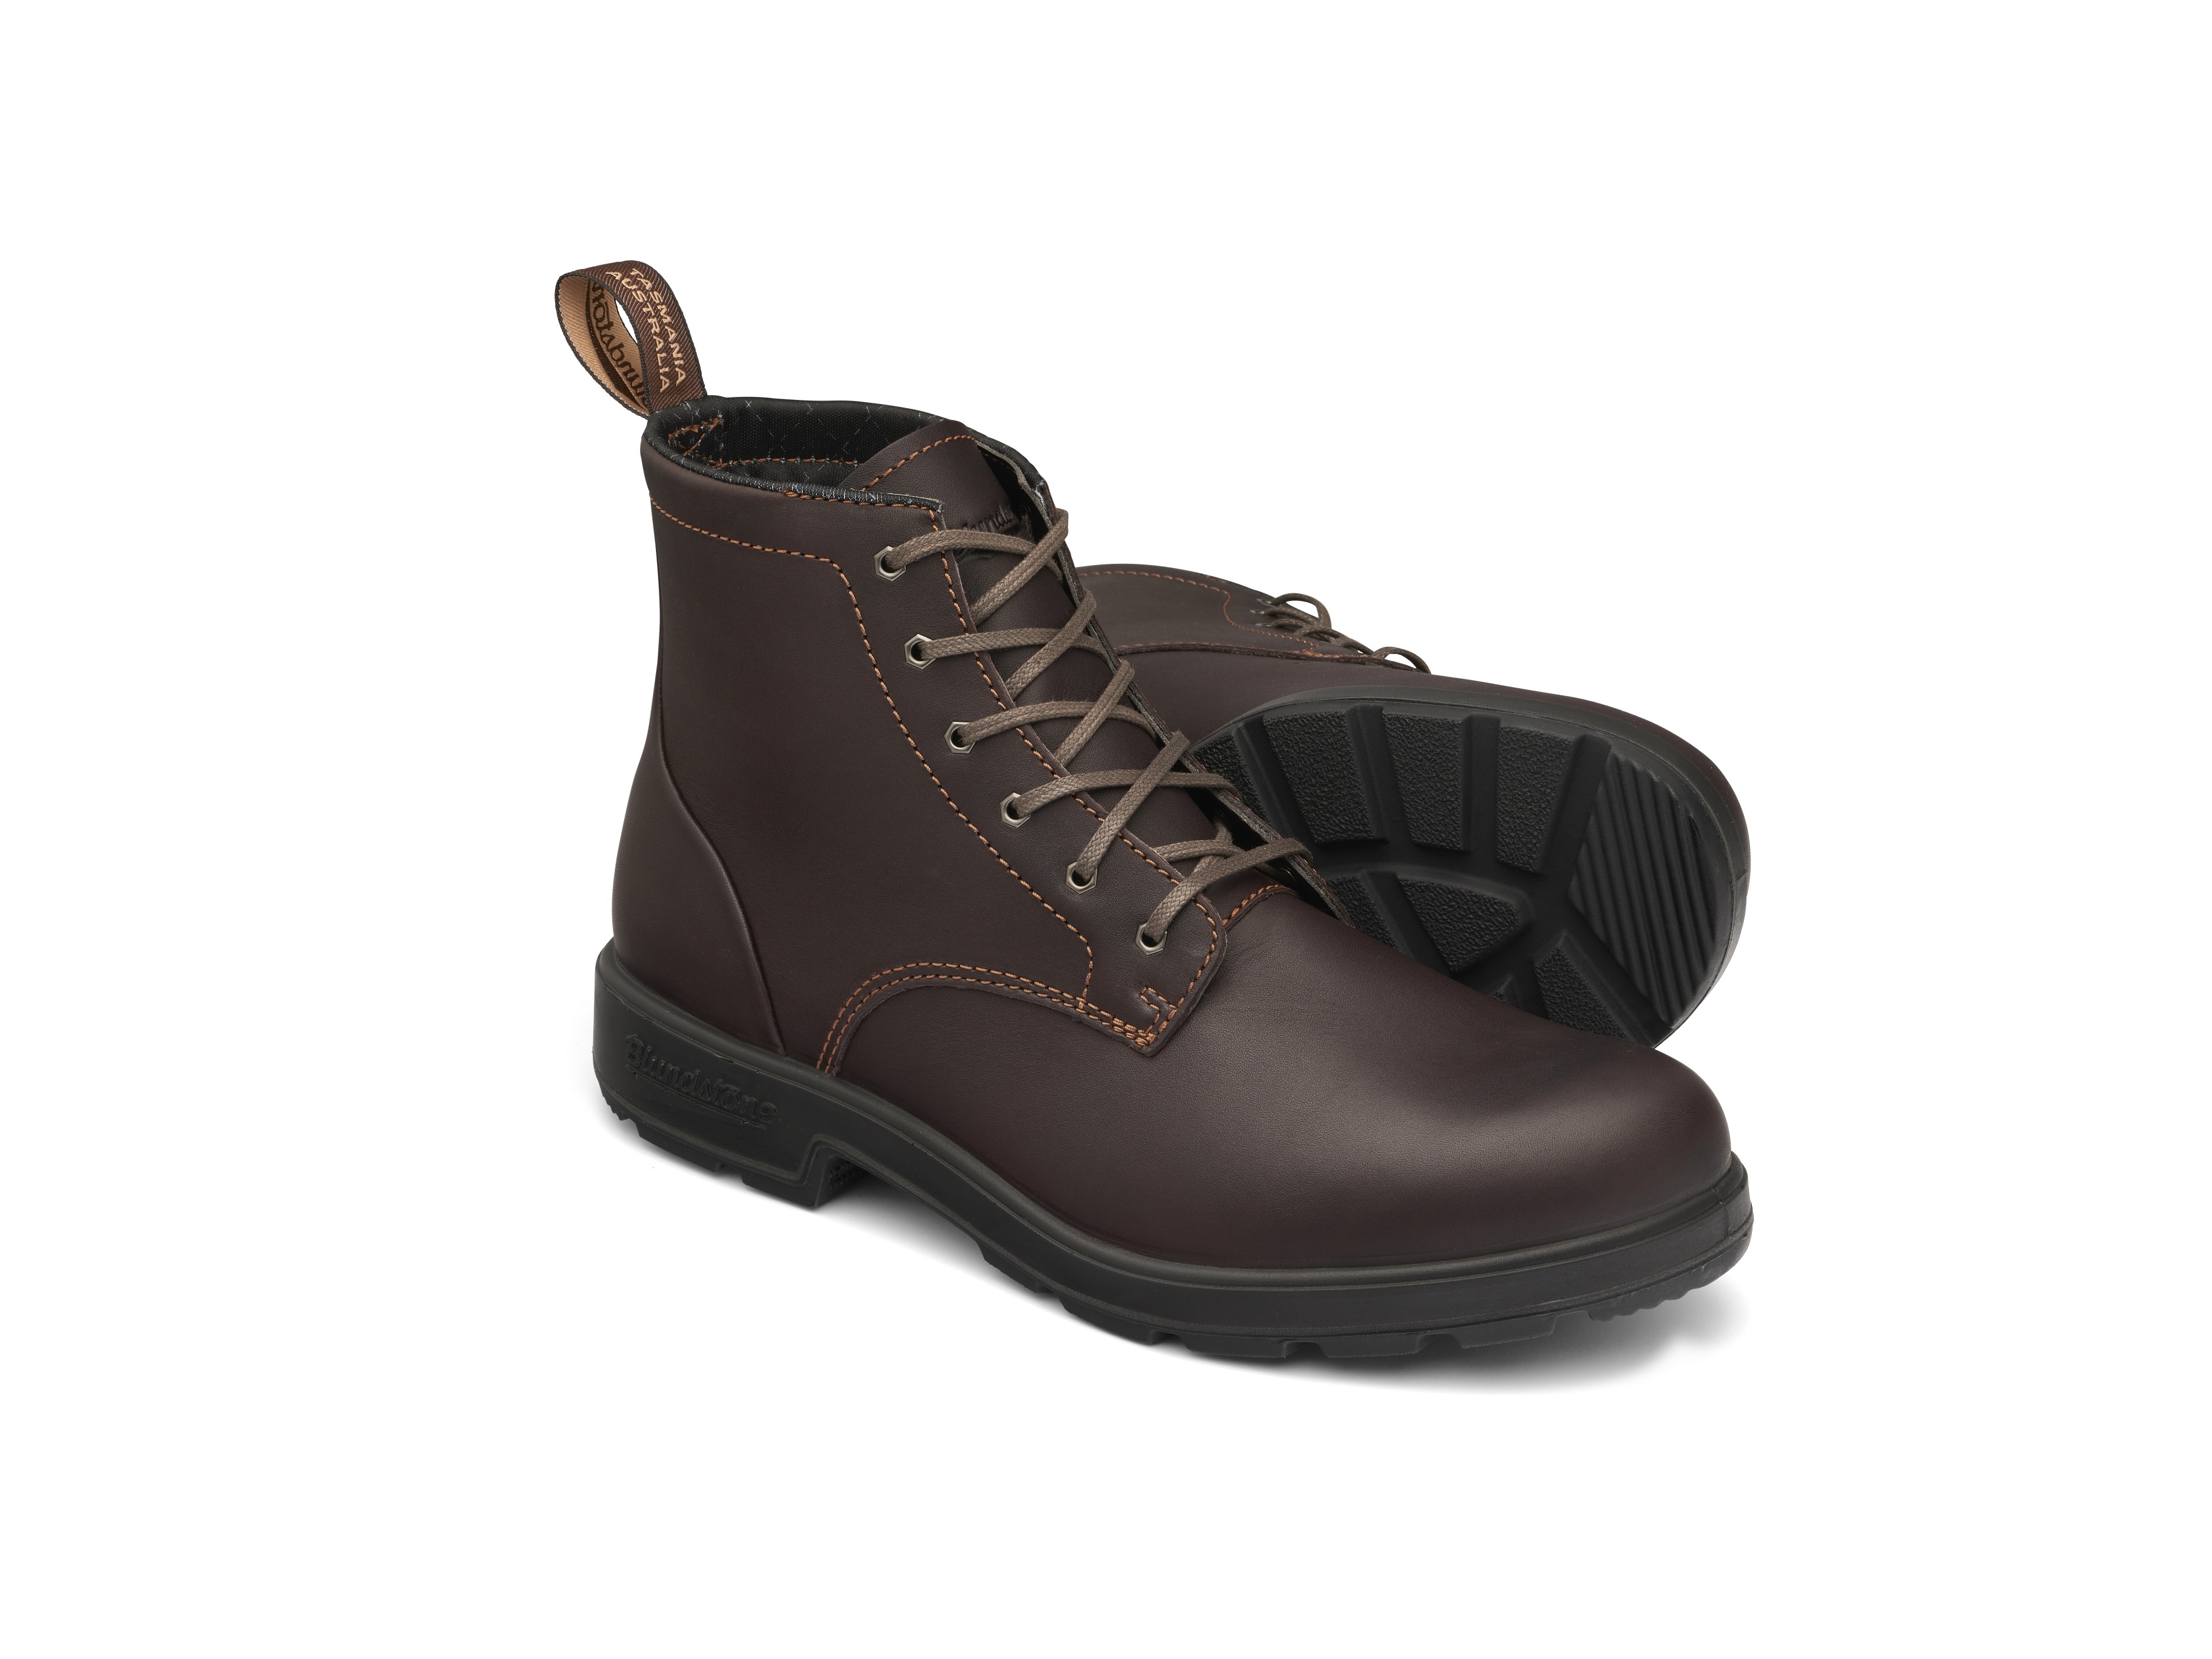 Blundstone 1618 Stout Braun Water Resistant Leather Leder